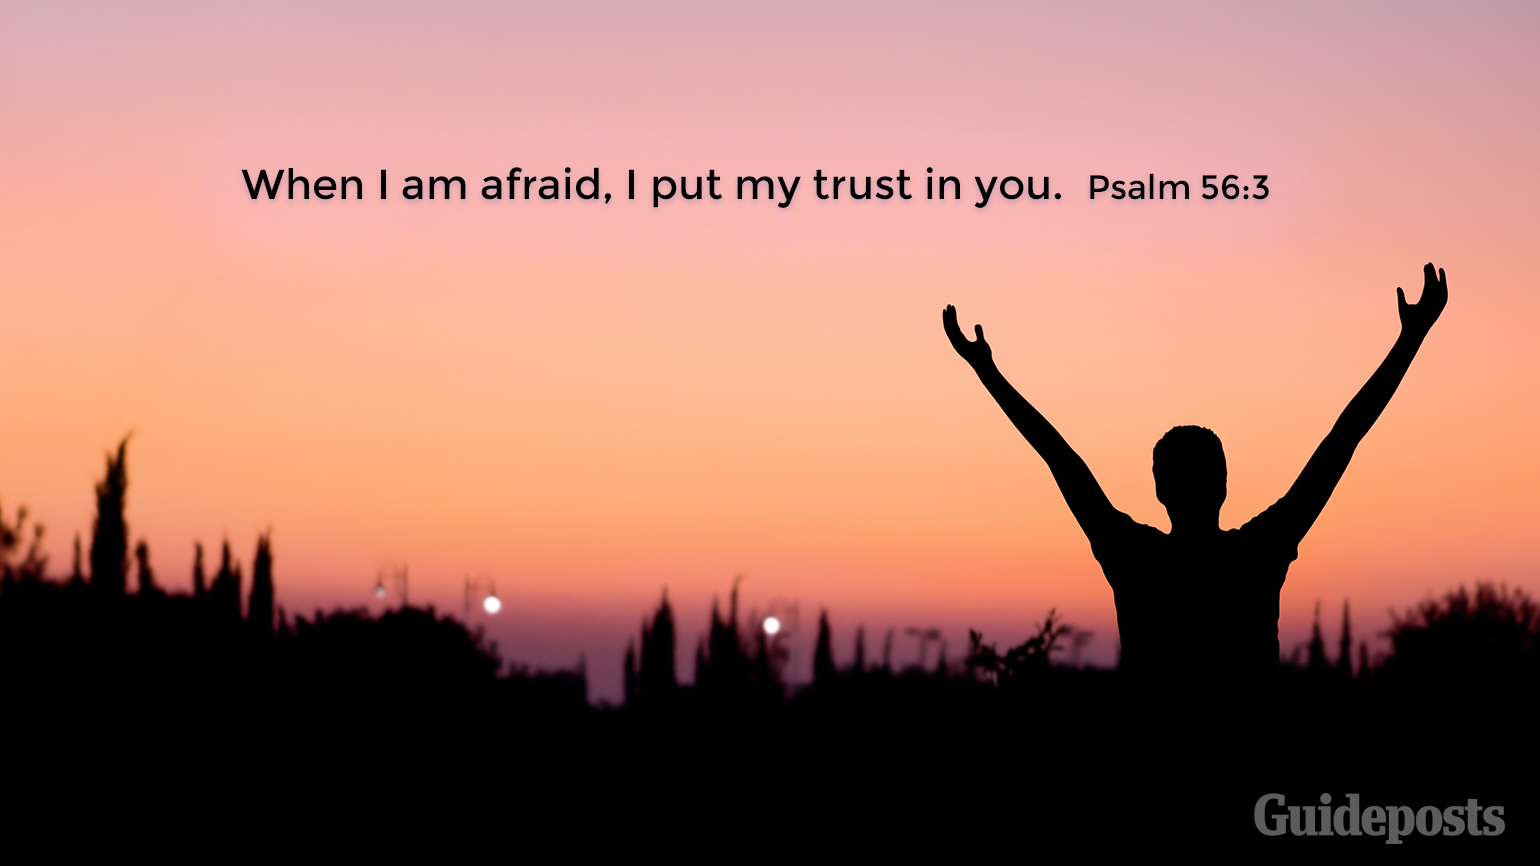 7 Bible Verses for a Good Night's Sleep"When I am afraid, I put my trust in you."  Psalm 56:3 Faith and Prayer Bible Resources